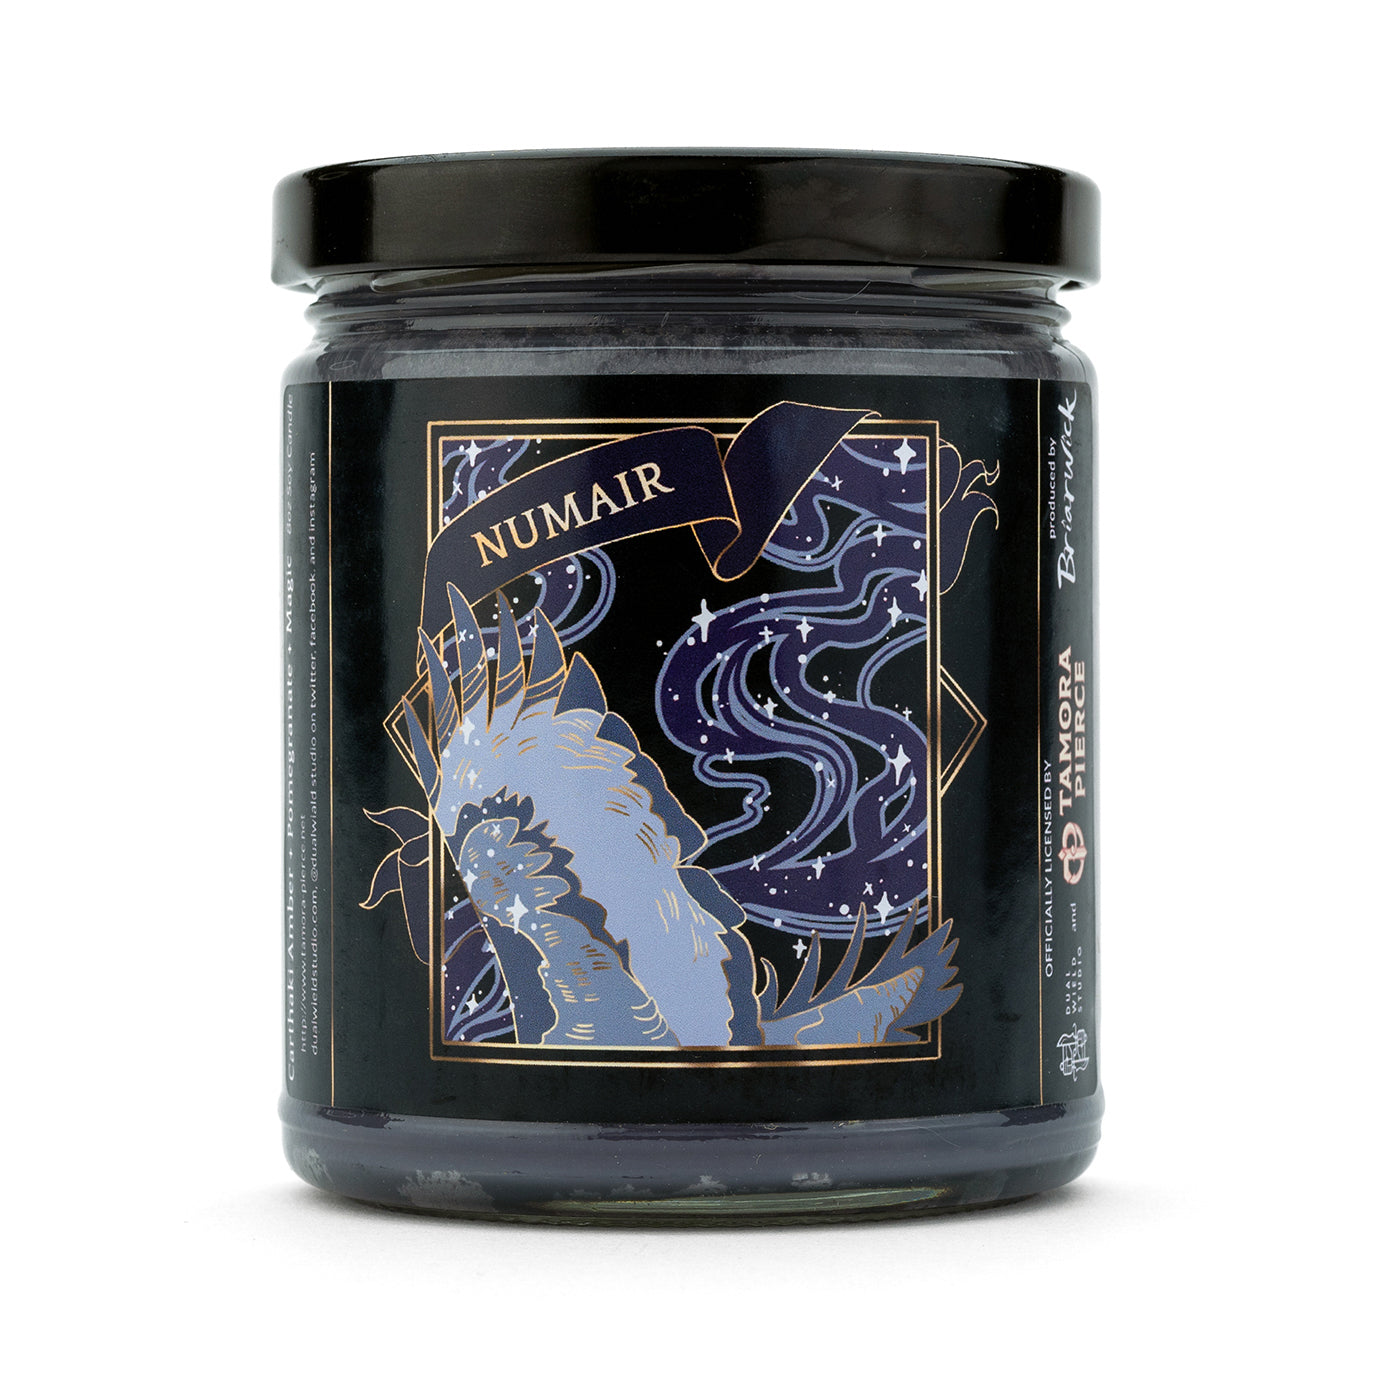 Numair Candle - Tamora Pierce Officially Licensed - Soy Vegan Candle